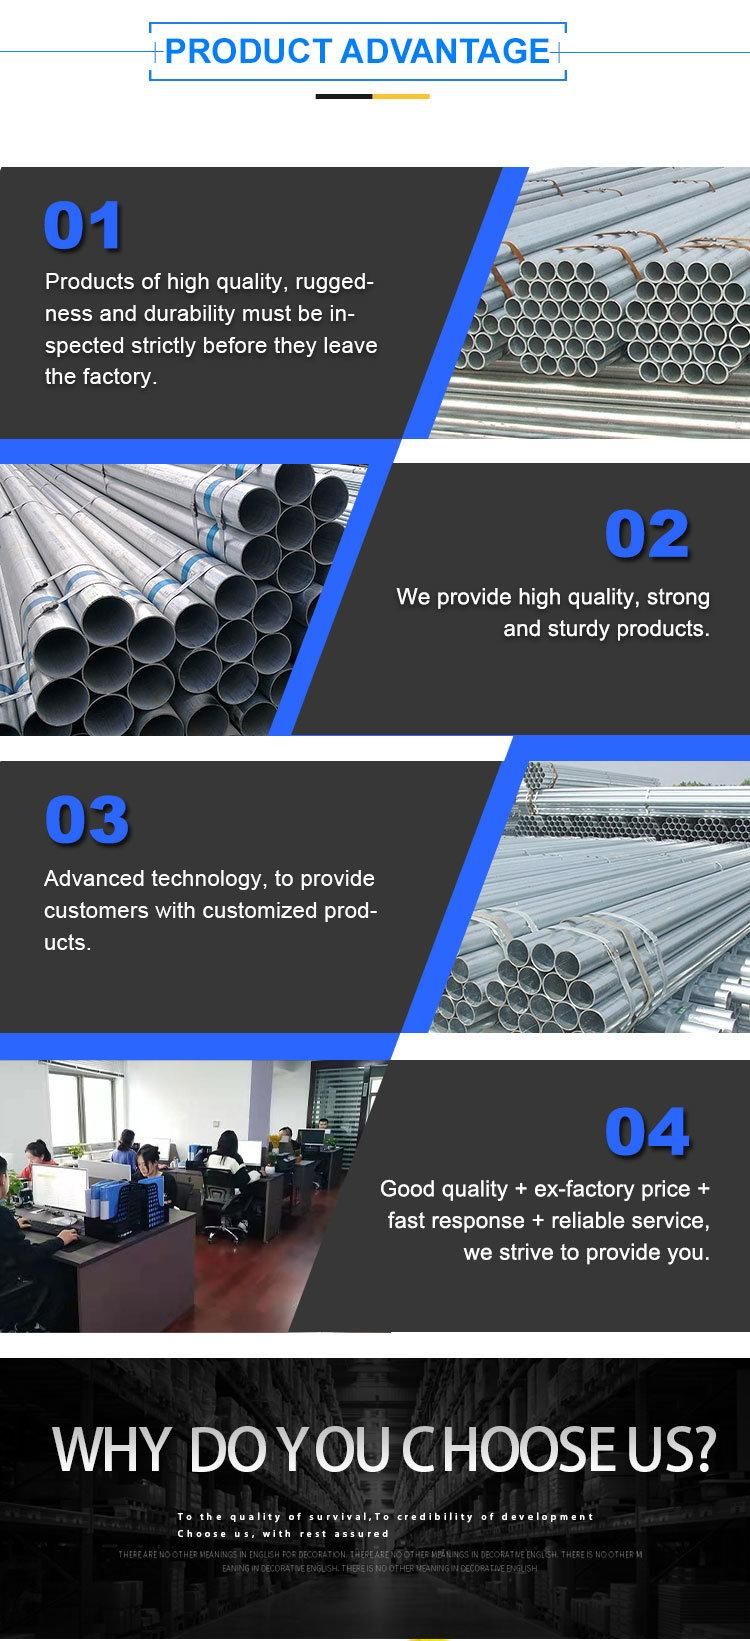 Oil/Gas Drilling Food/Beverage/Dairy Products Hot Dipped Carbon Pipes Galvanized Steel Tube